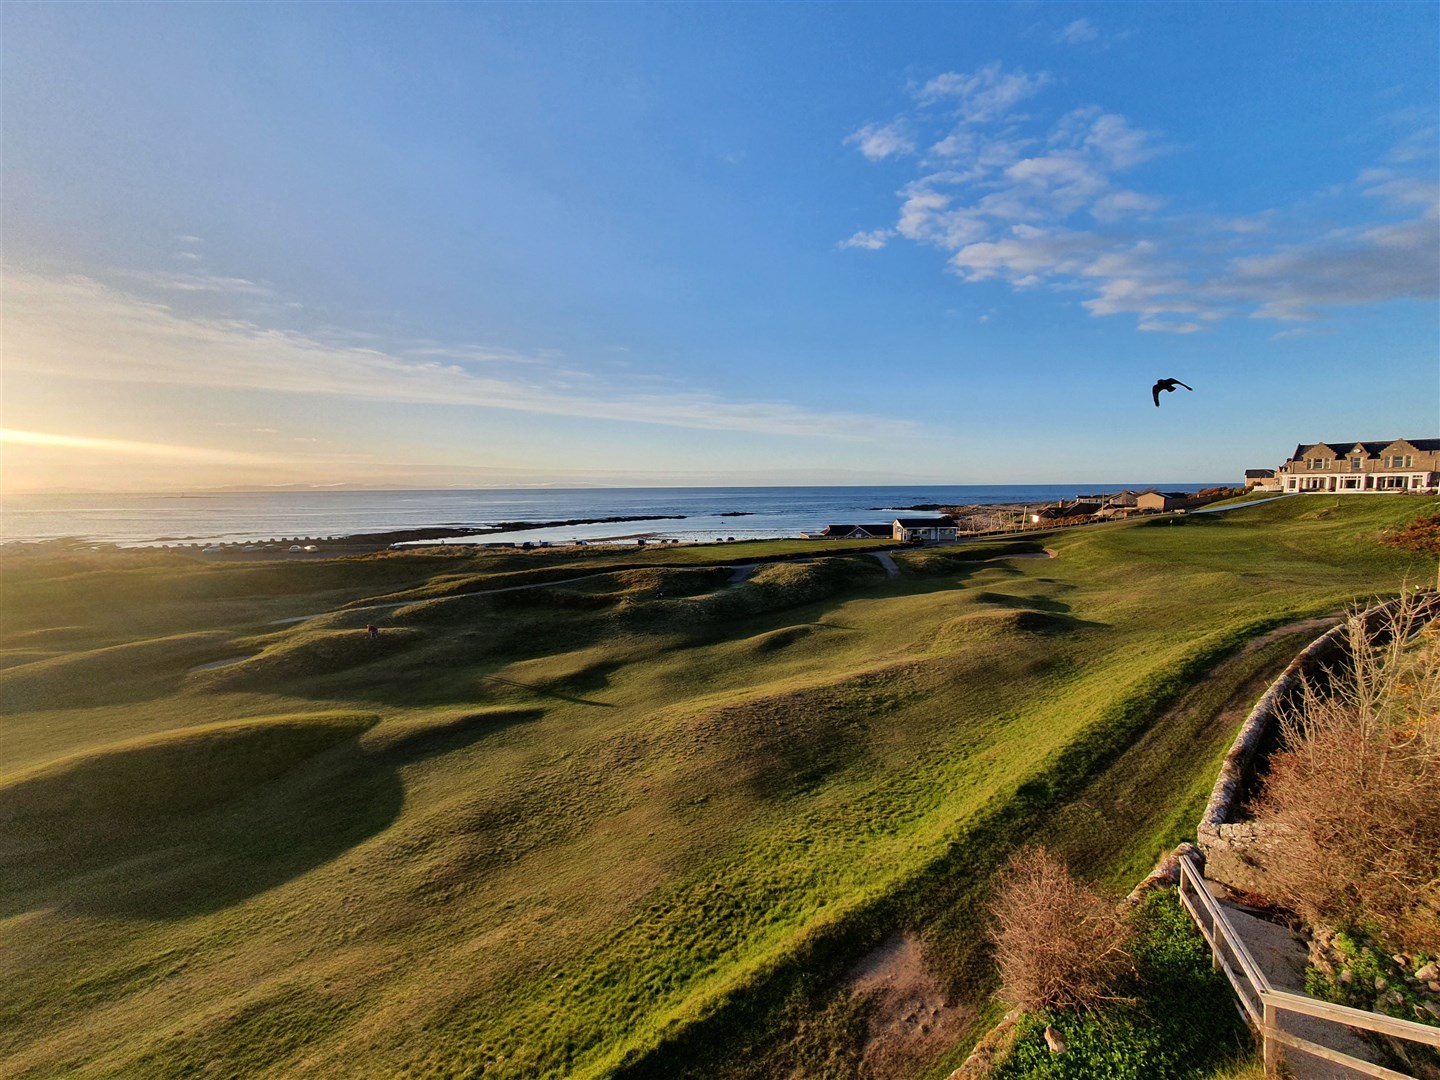 Moray Golf Club hosts the Northern Open this week.